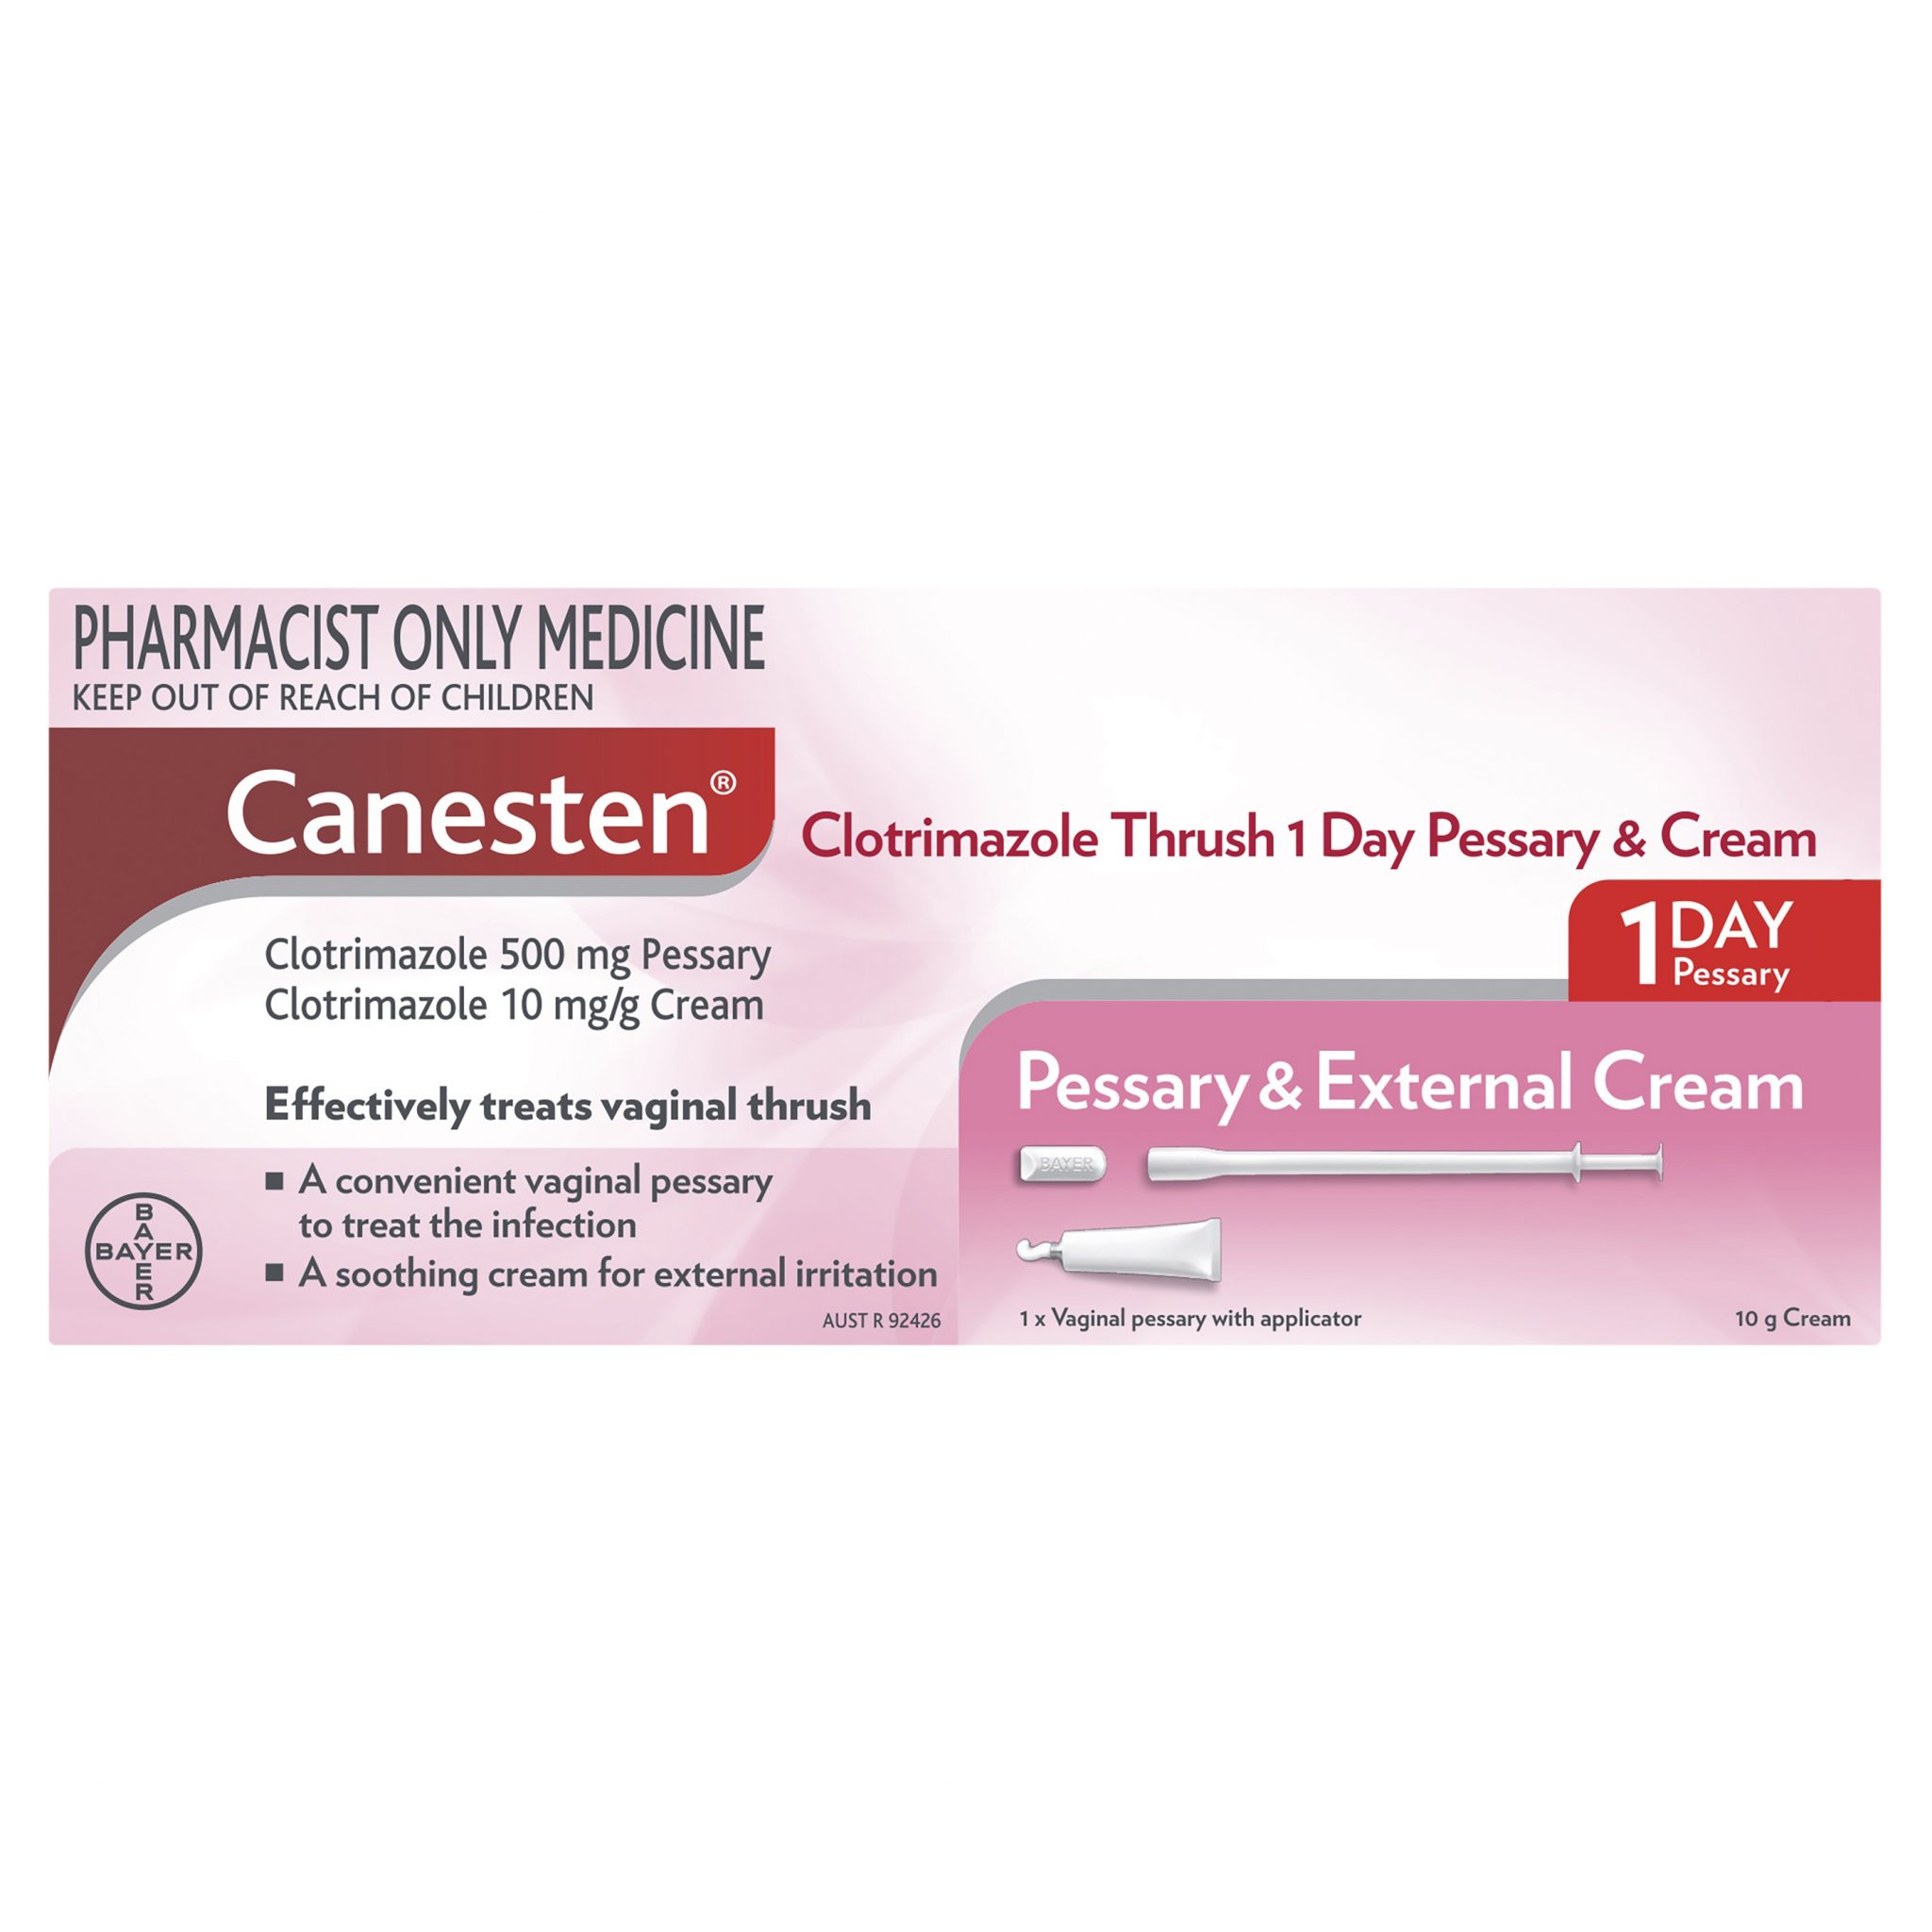 Canesten tablet and cream